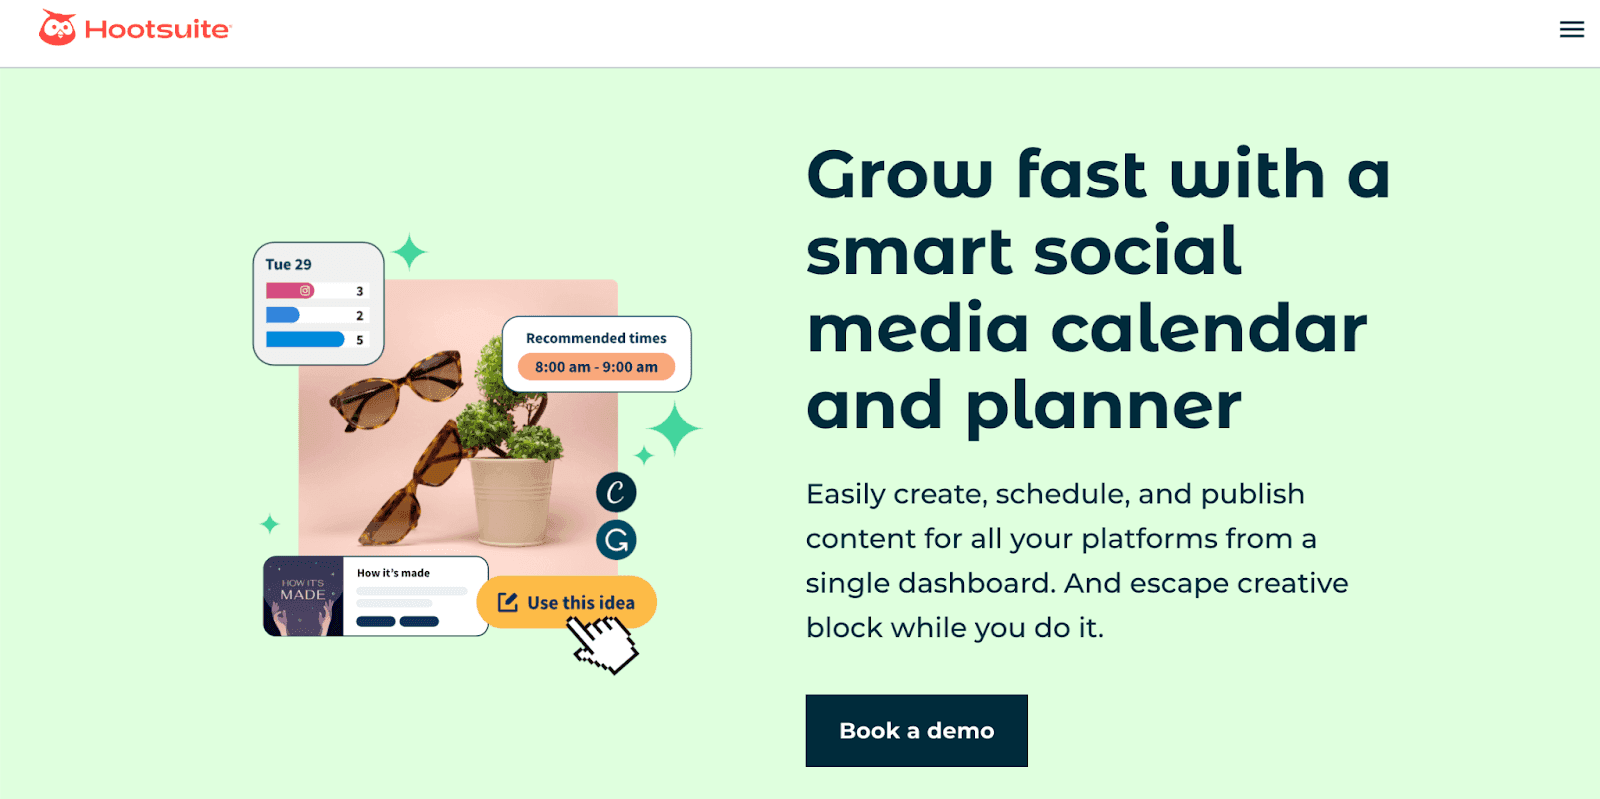 Grow fast with a smart social media calendar and planner